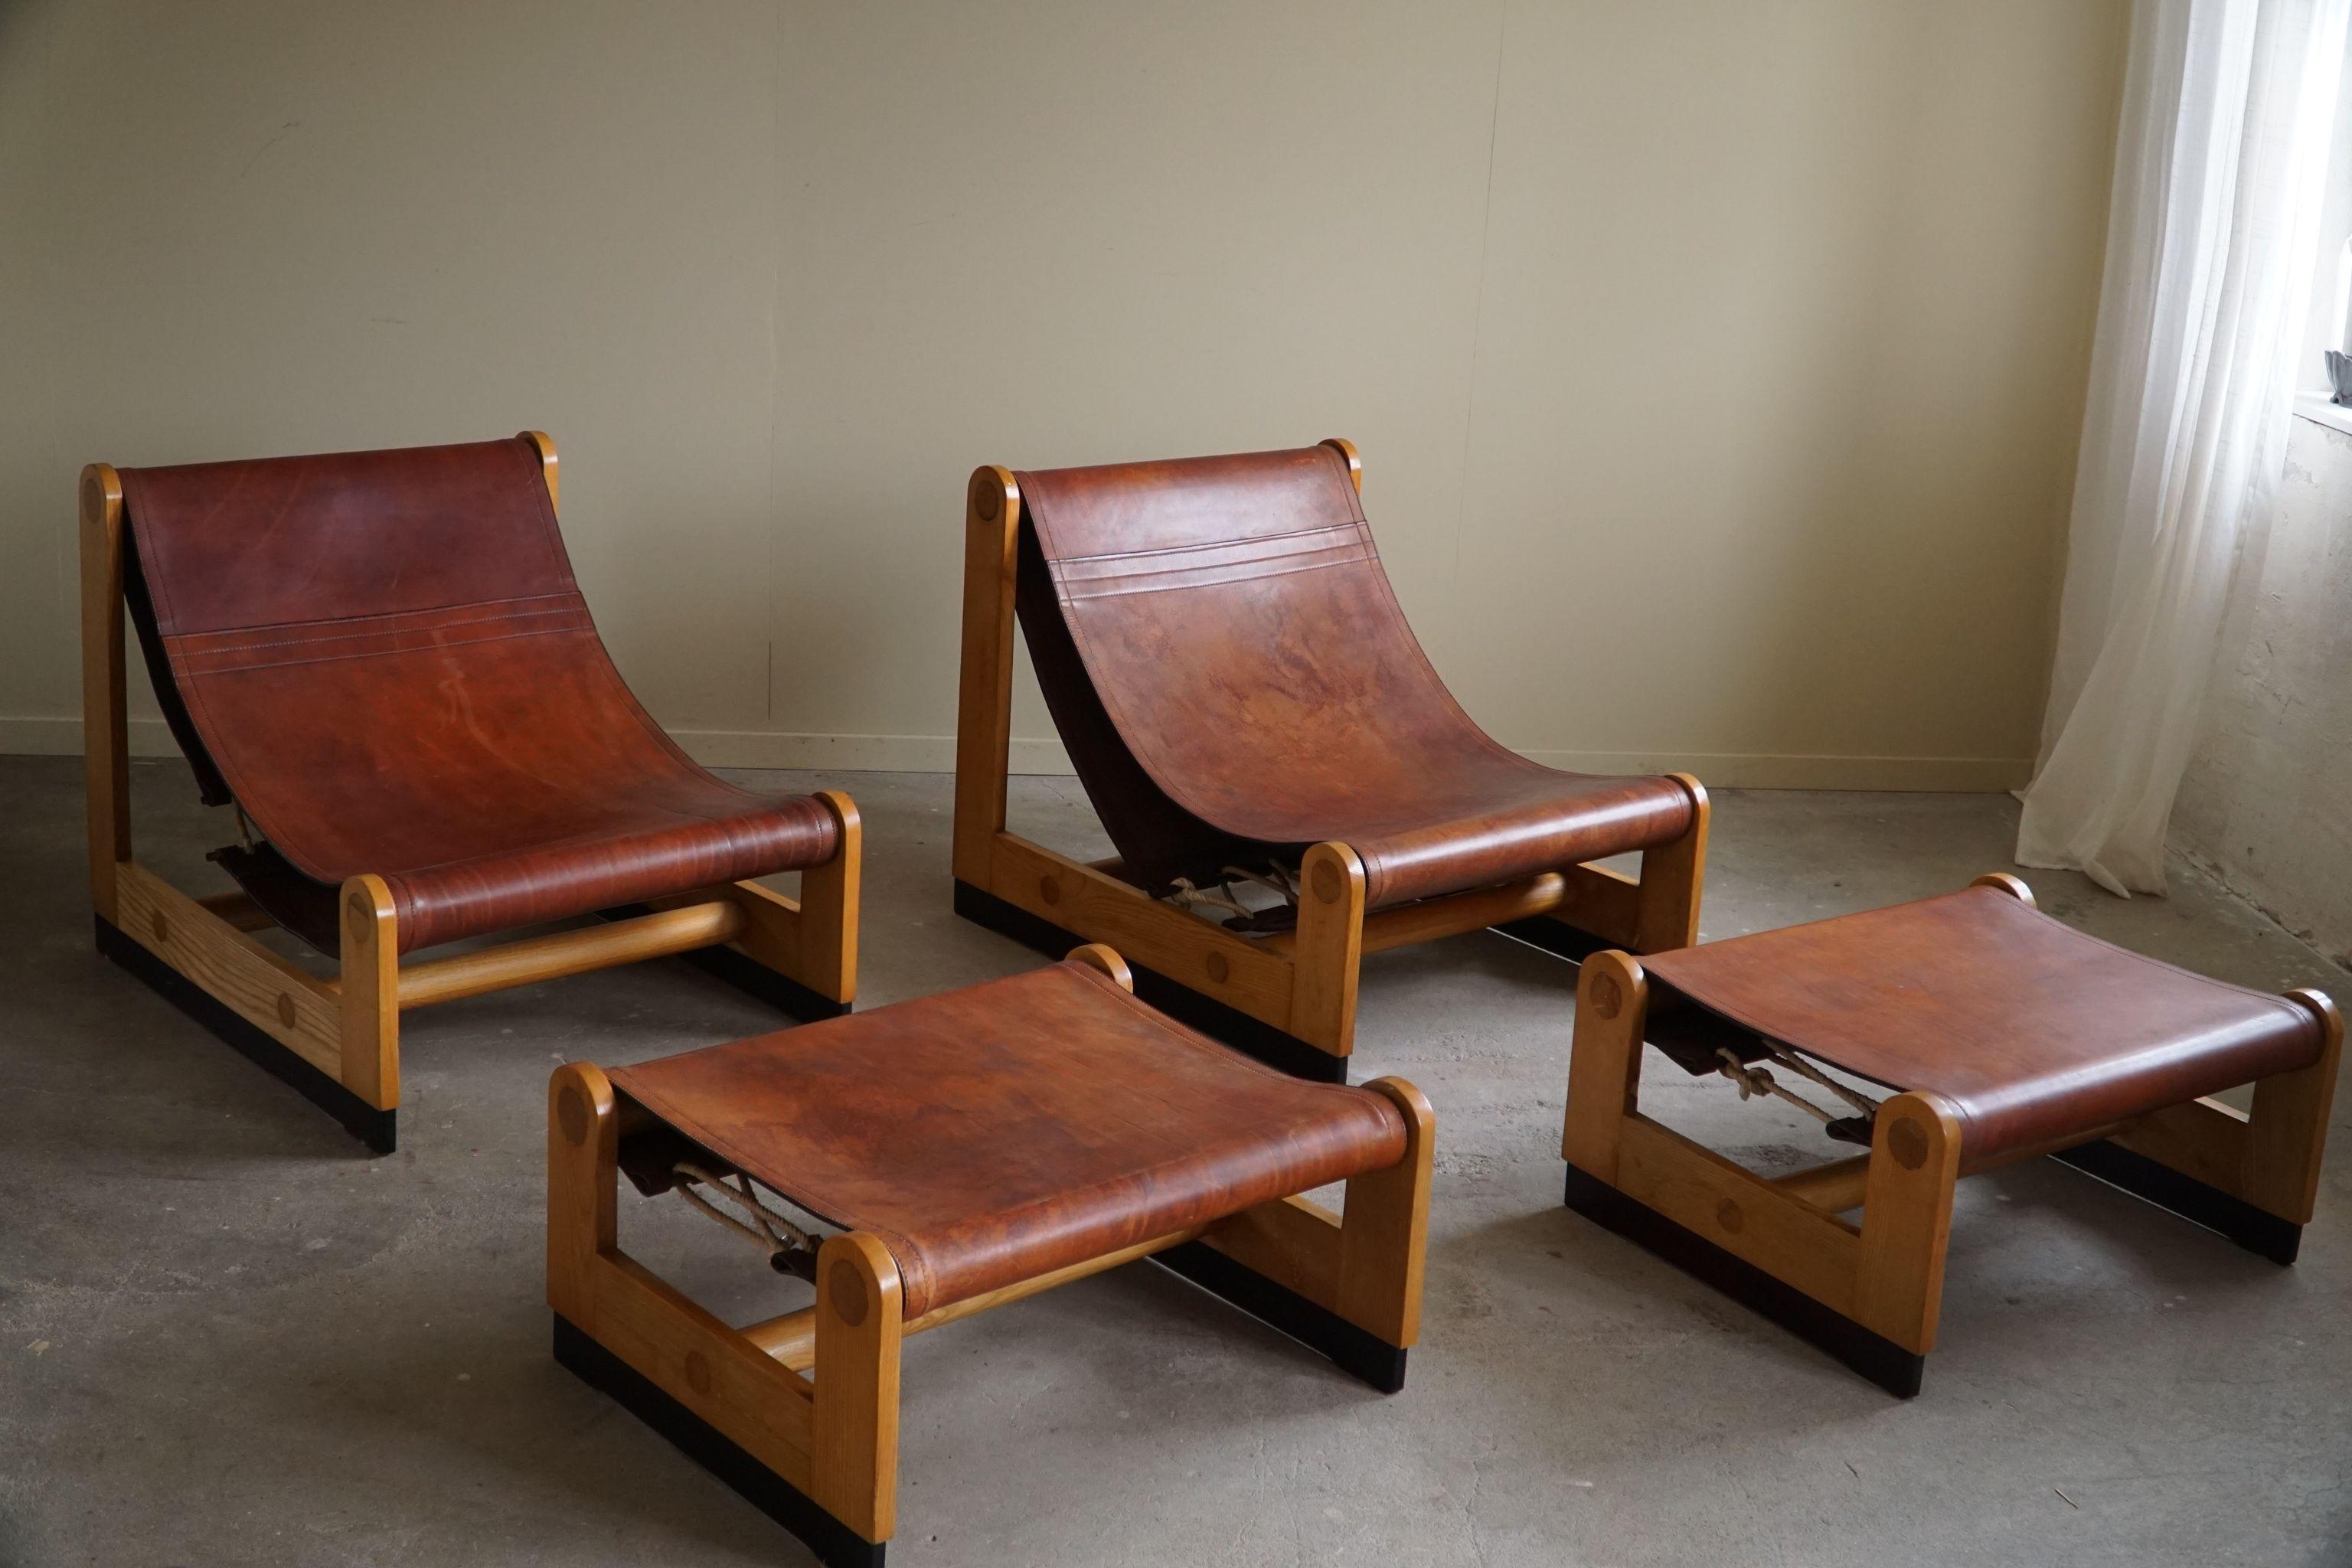 Francesco Lucianetti, Lounge Chairs in Leather & Elm, Italian Modern, 1960s For Sale 9